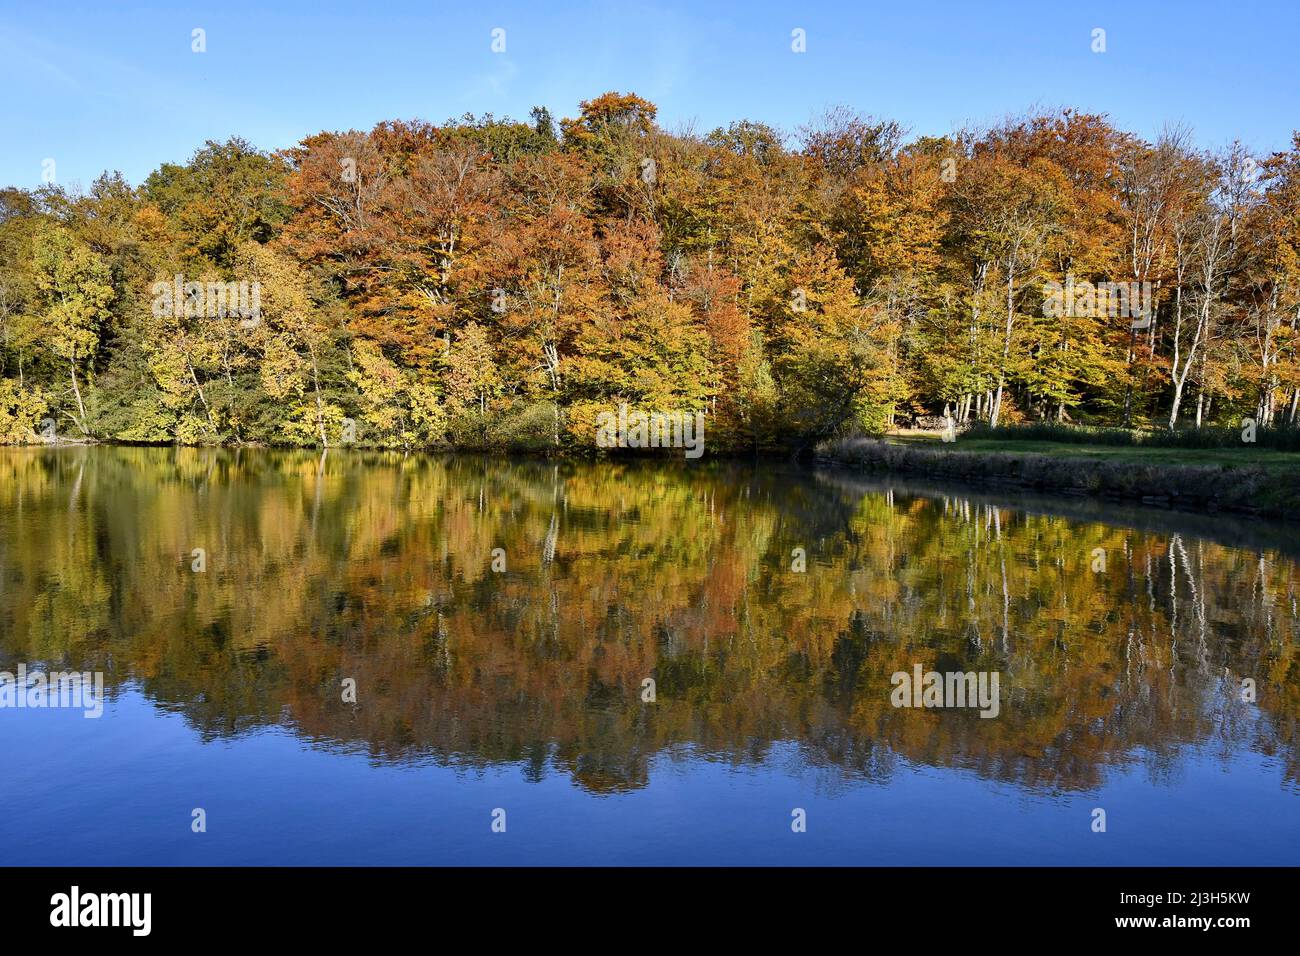 France, Doubs, forest, autumn reflection in a pond Stock Photo